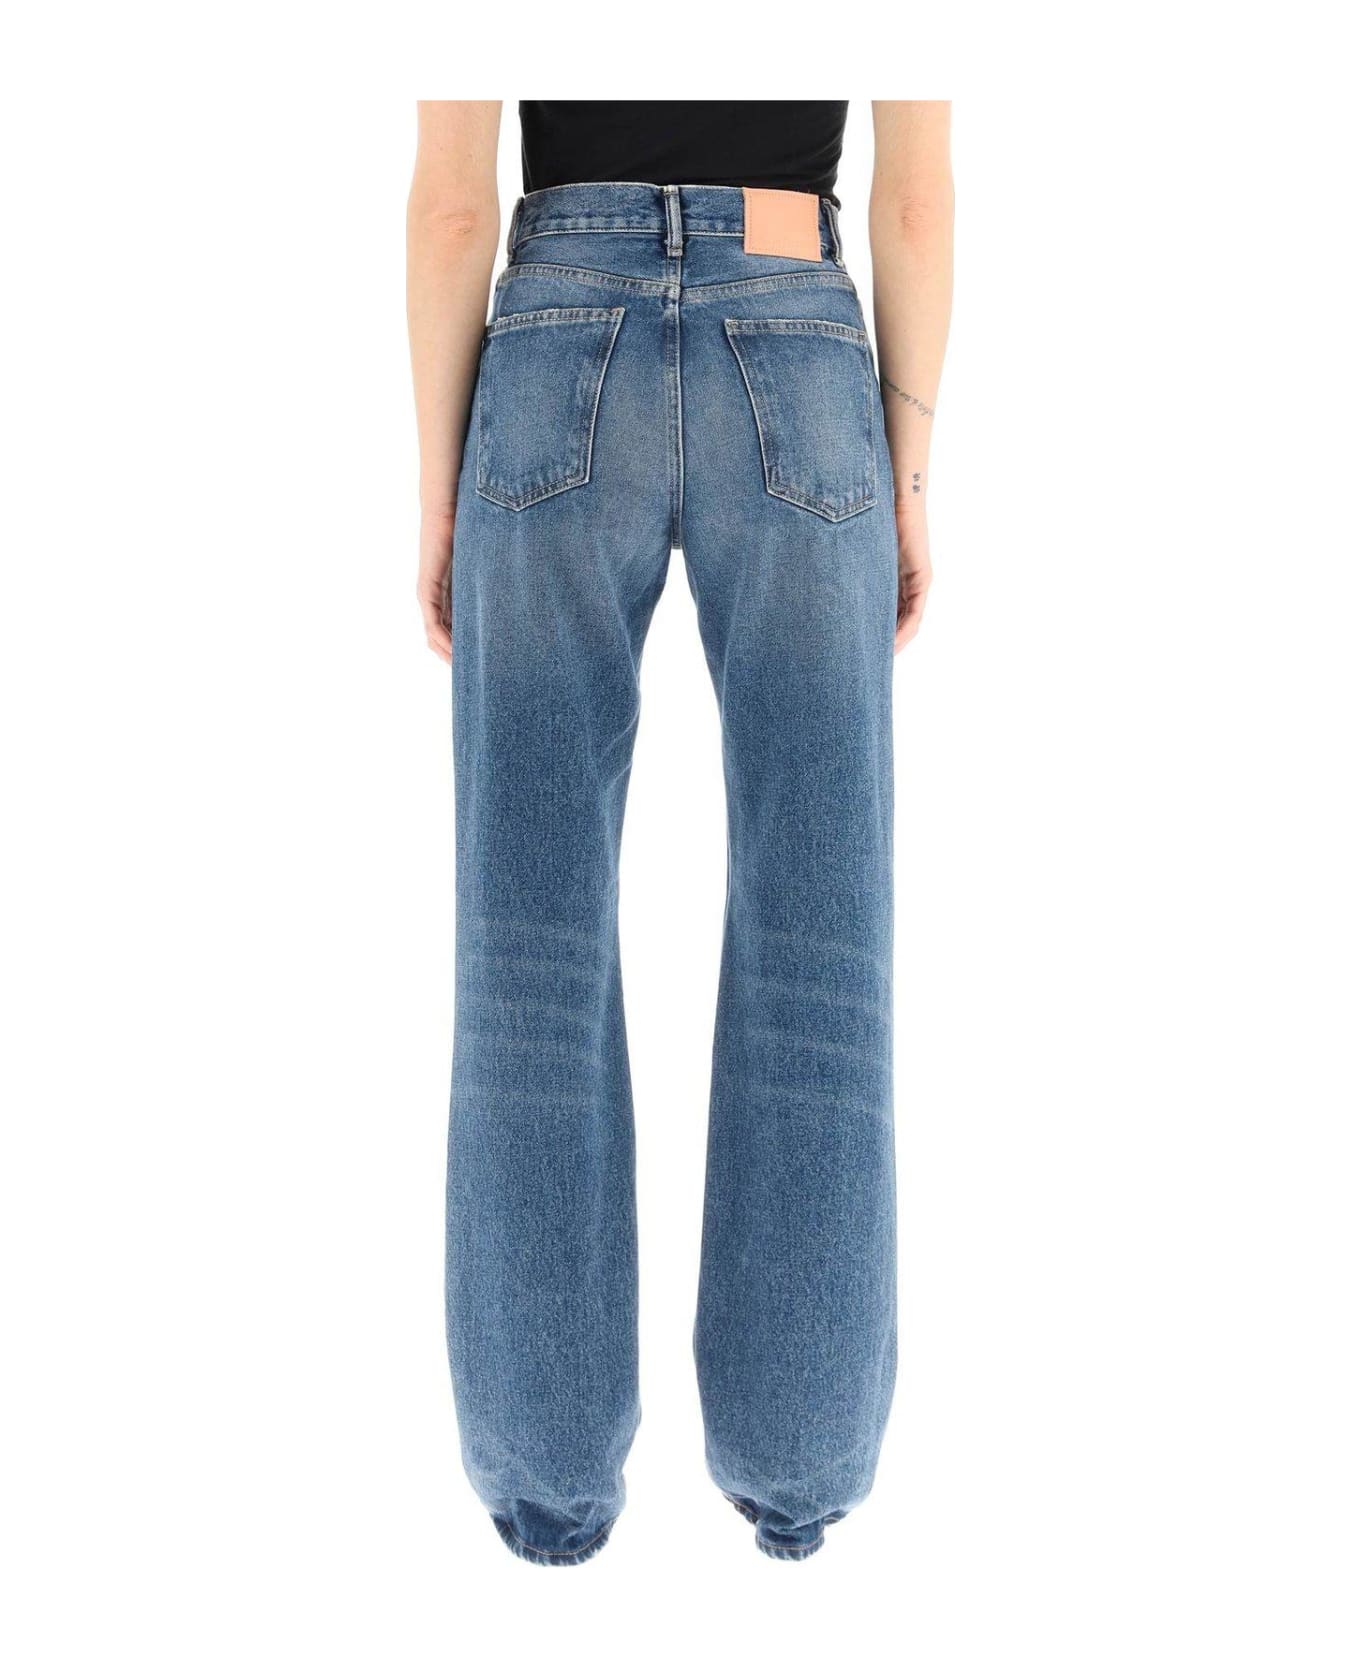 Acne Studios Distressed Mid-rise Jeans - Blue